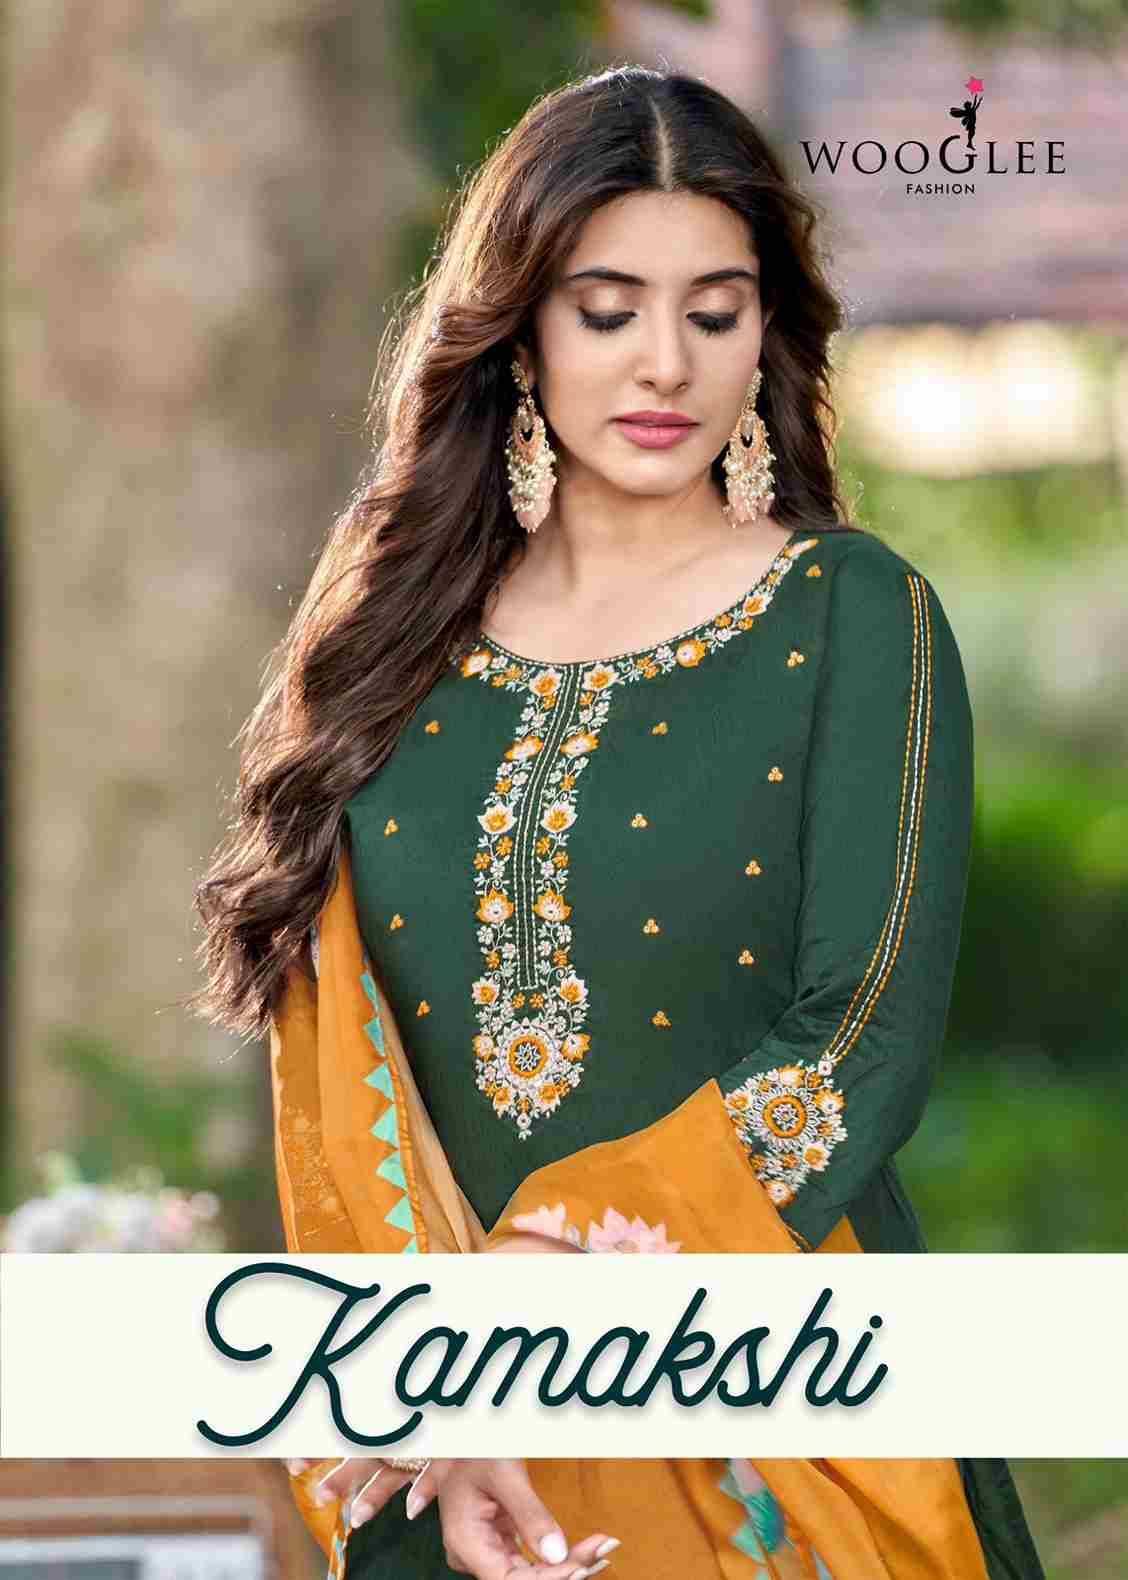 Kamakshi By Wooglee 6001 To 6006 Series Beautiful Stylish Festive Suits Fancy Colorful Casual Wear & Ethnic Wear & Ready To Wear Viscose Embroidered Dresses At Wholesale Price